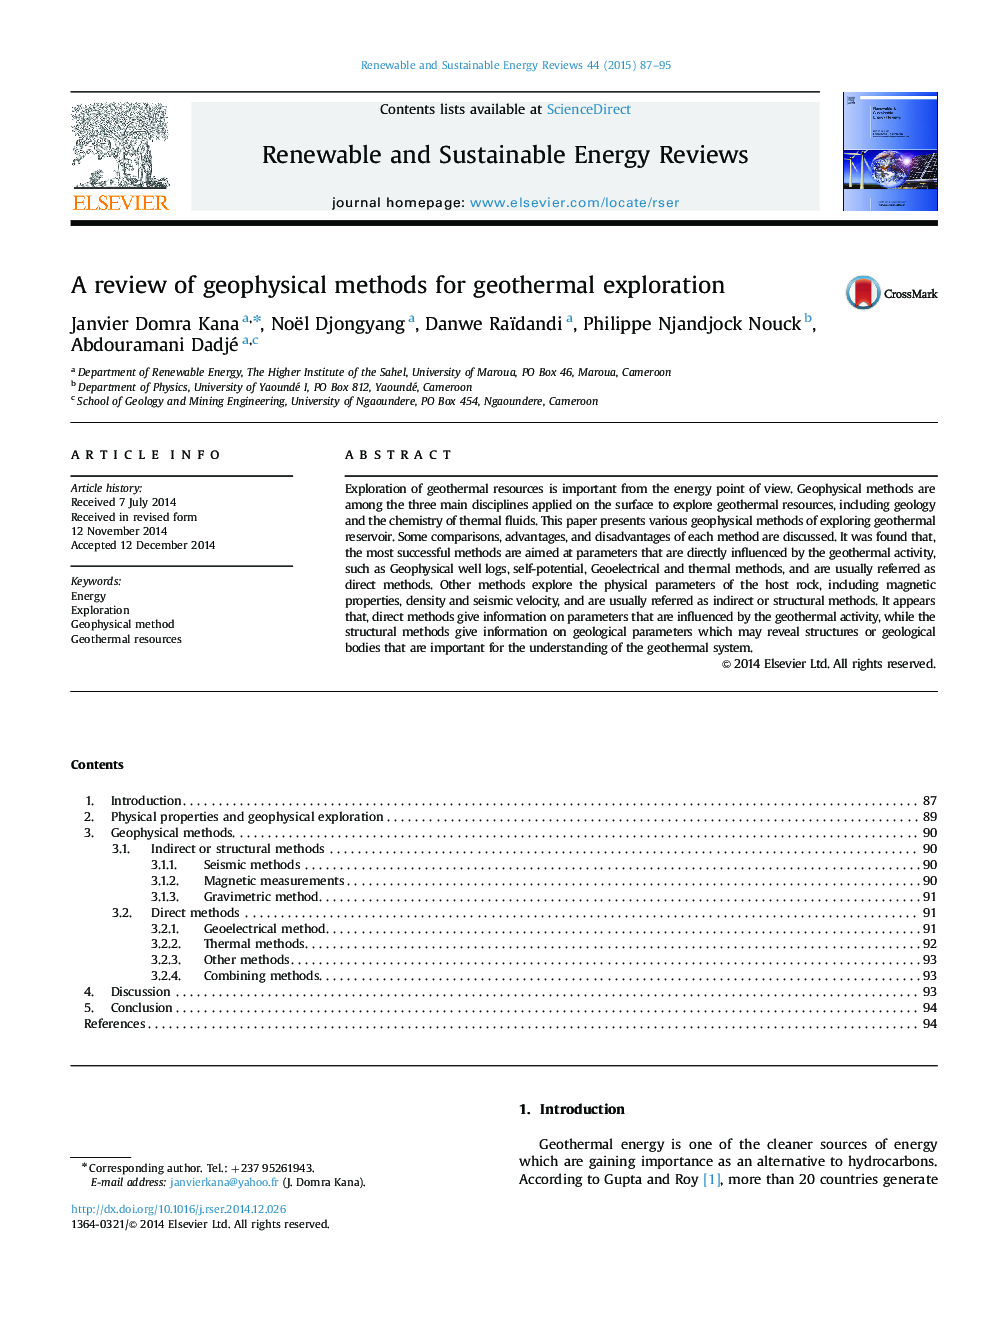 A review of geophysical methods for geothermal exploration